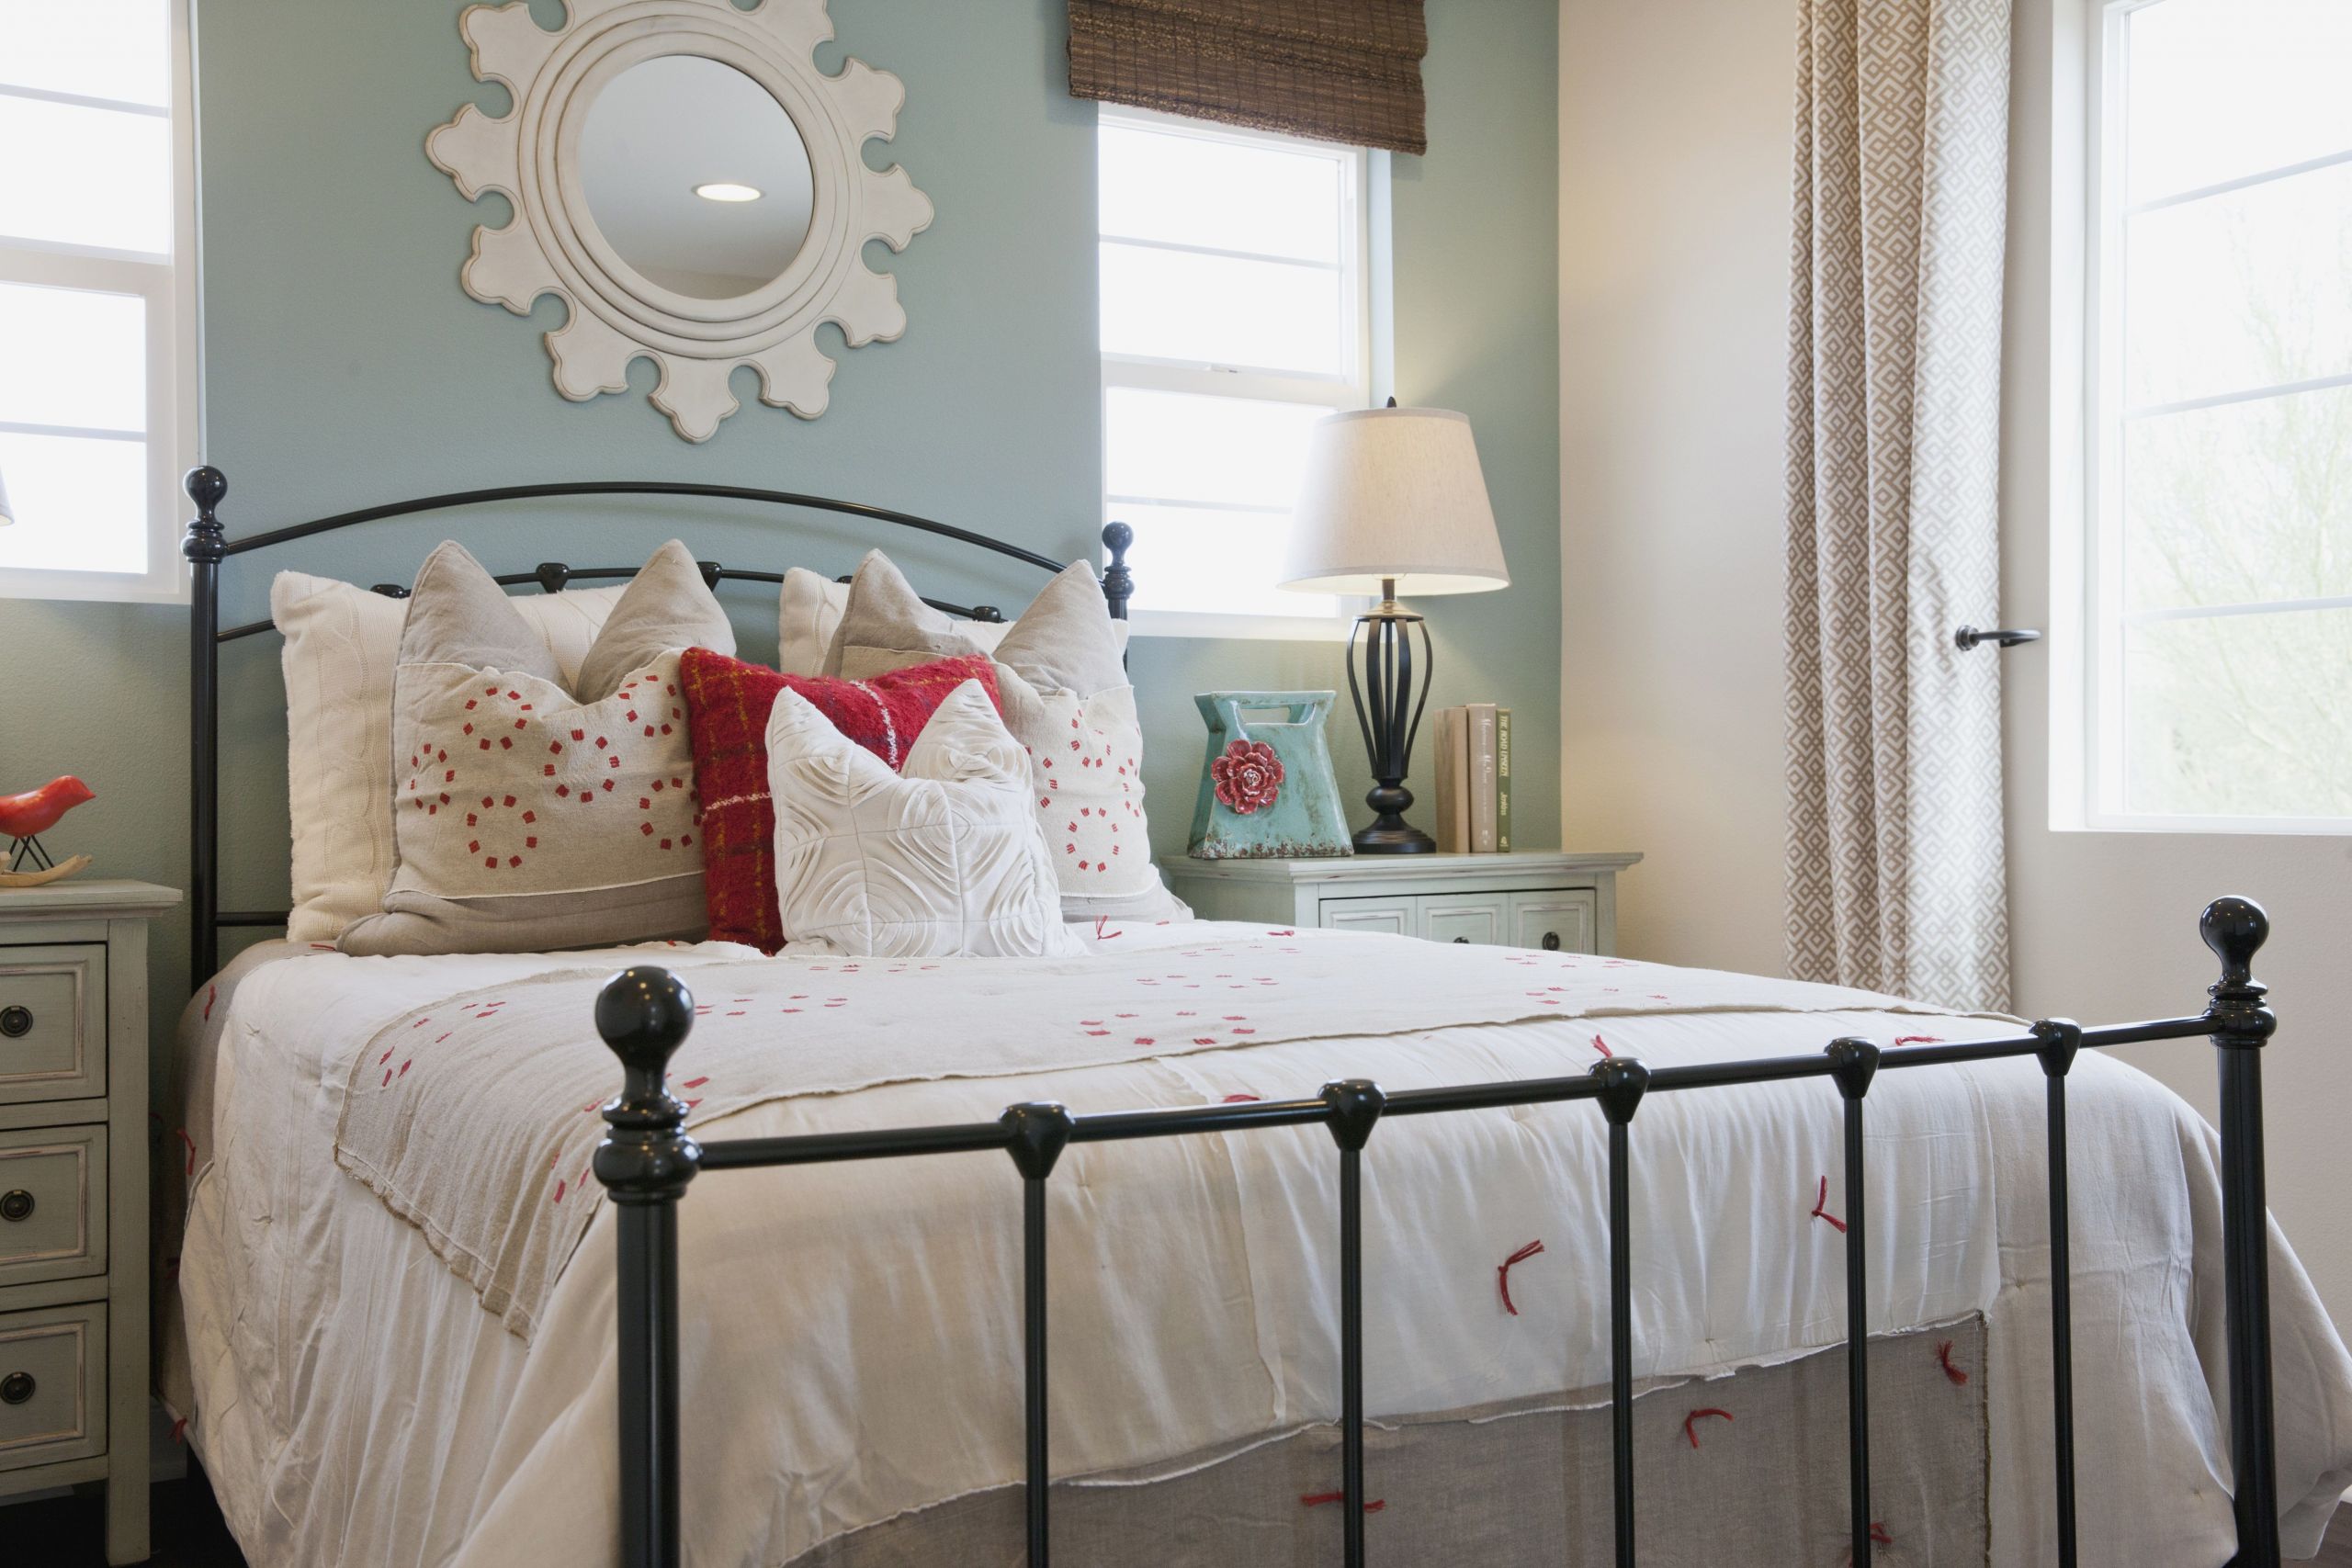 Images Of Shabby Chic Bedrooms
 s and Tips for Decorating a Shabby Chic Bedroom